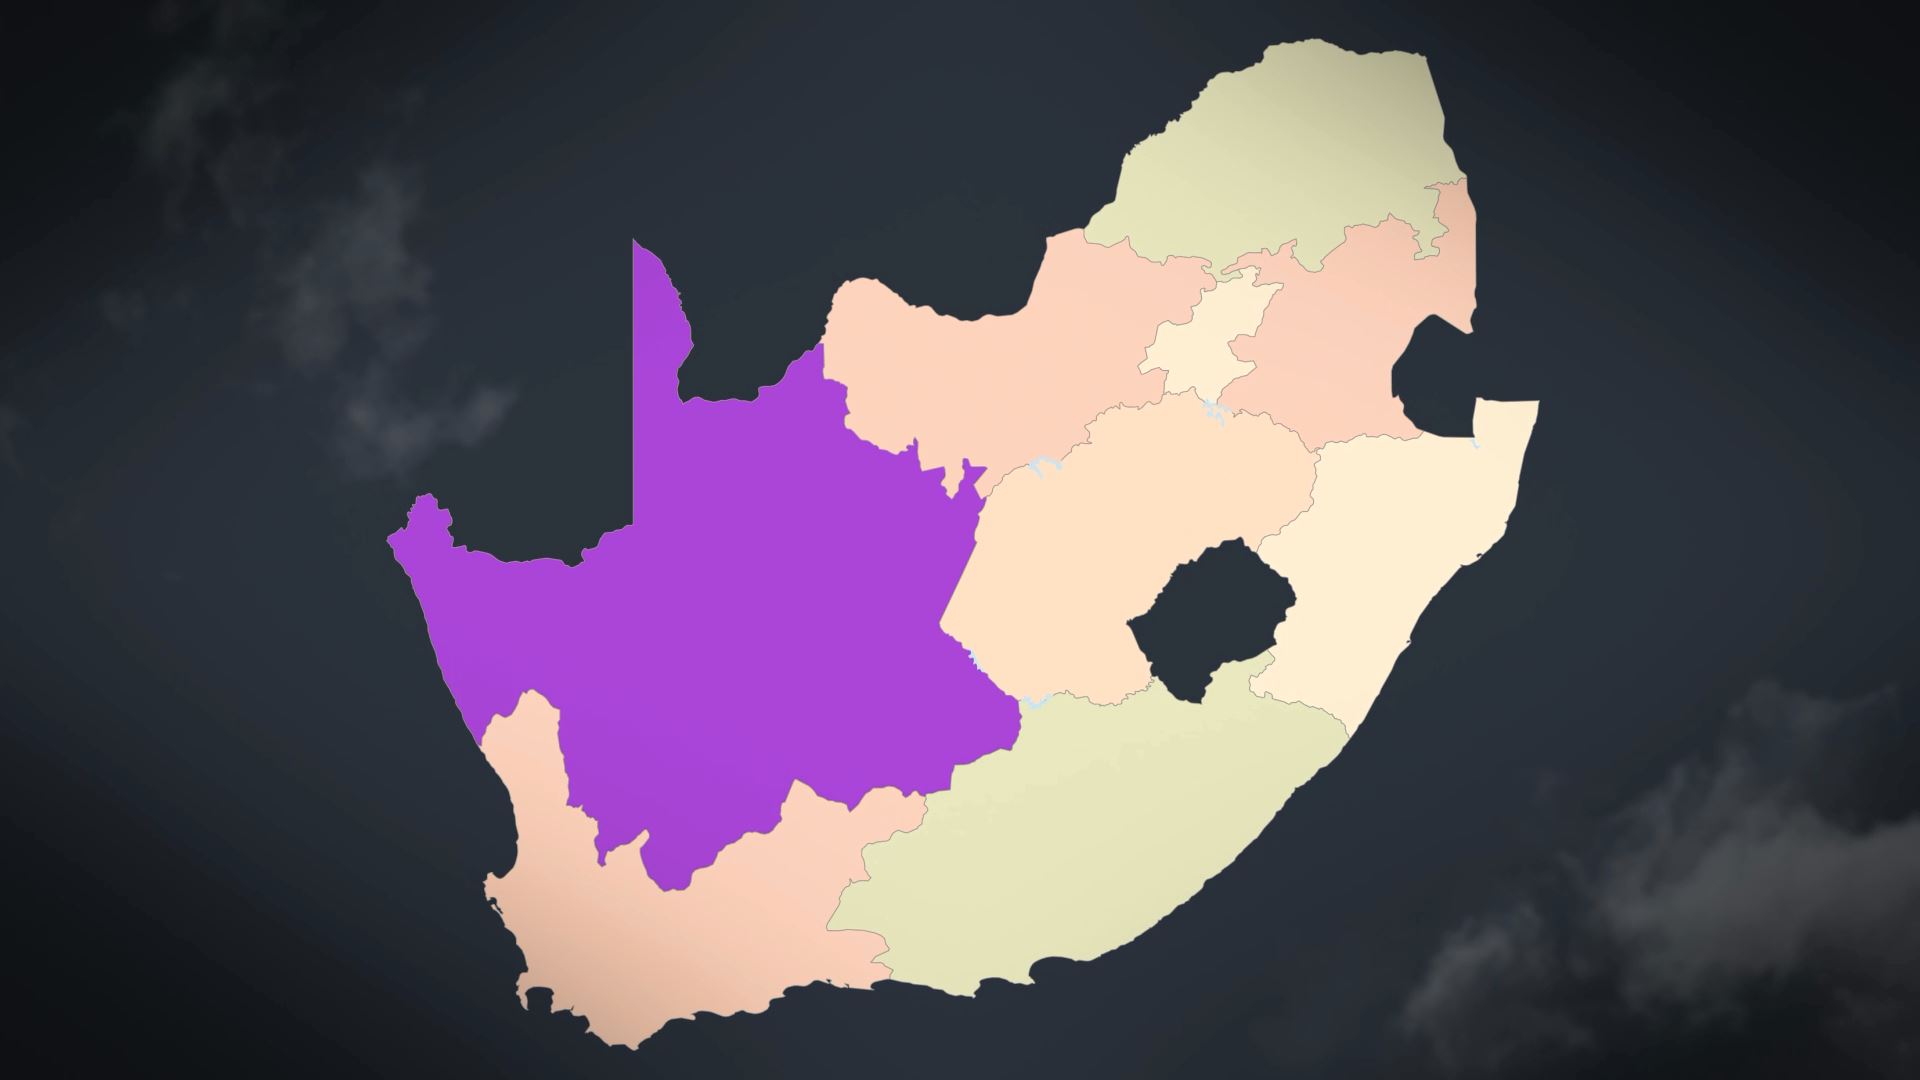  South Africa Map - Republic of South Africa Map Kit 